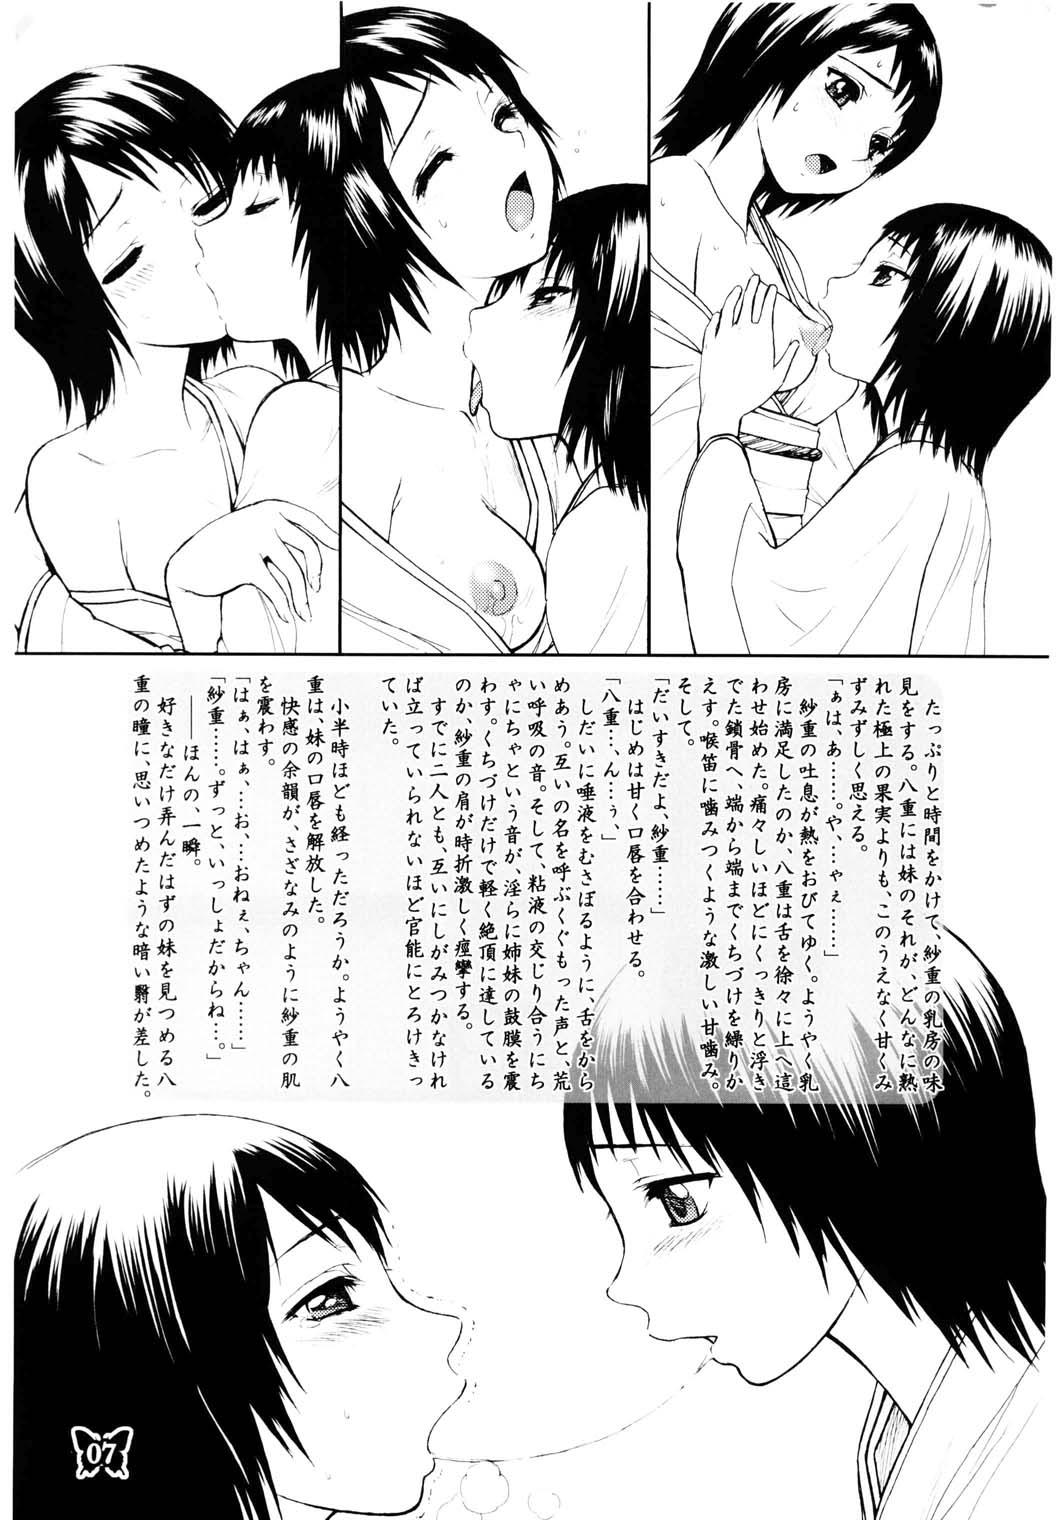 Topless Furanki - Fatal frame Assfucked - Page 7